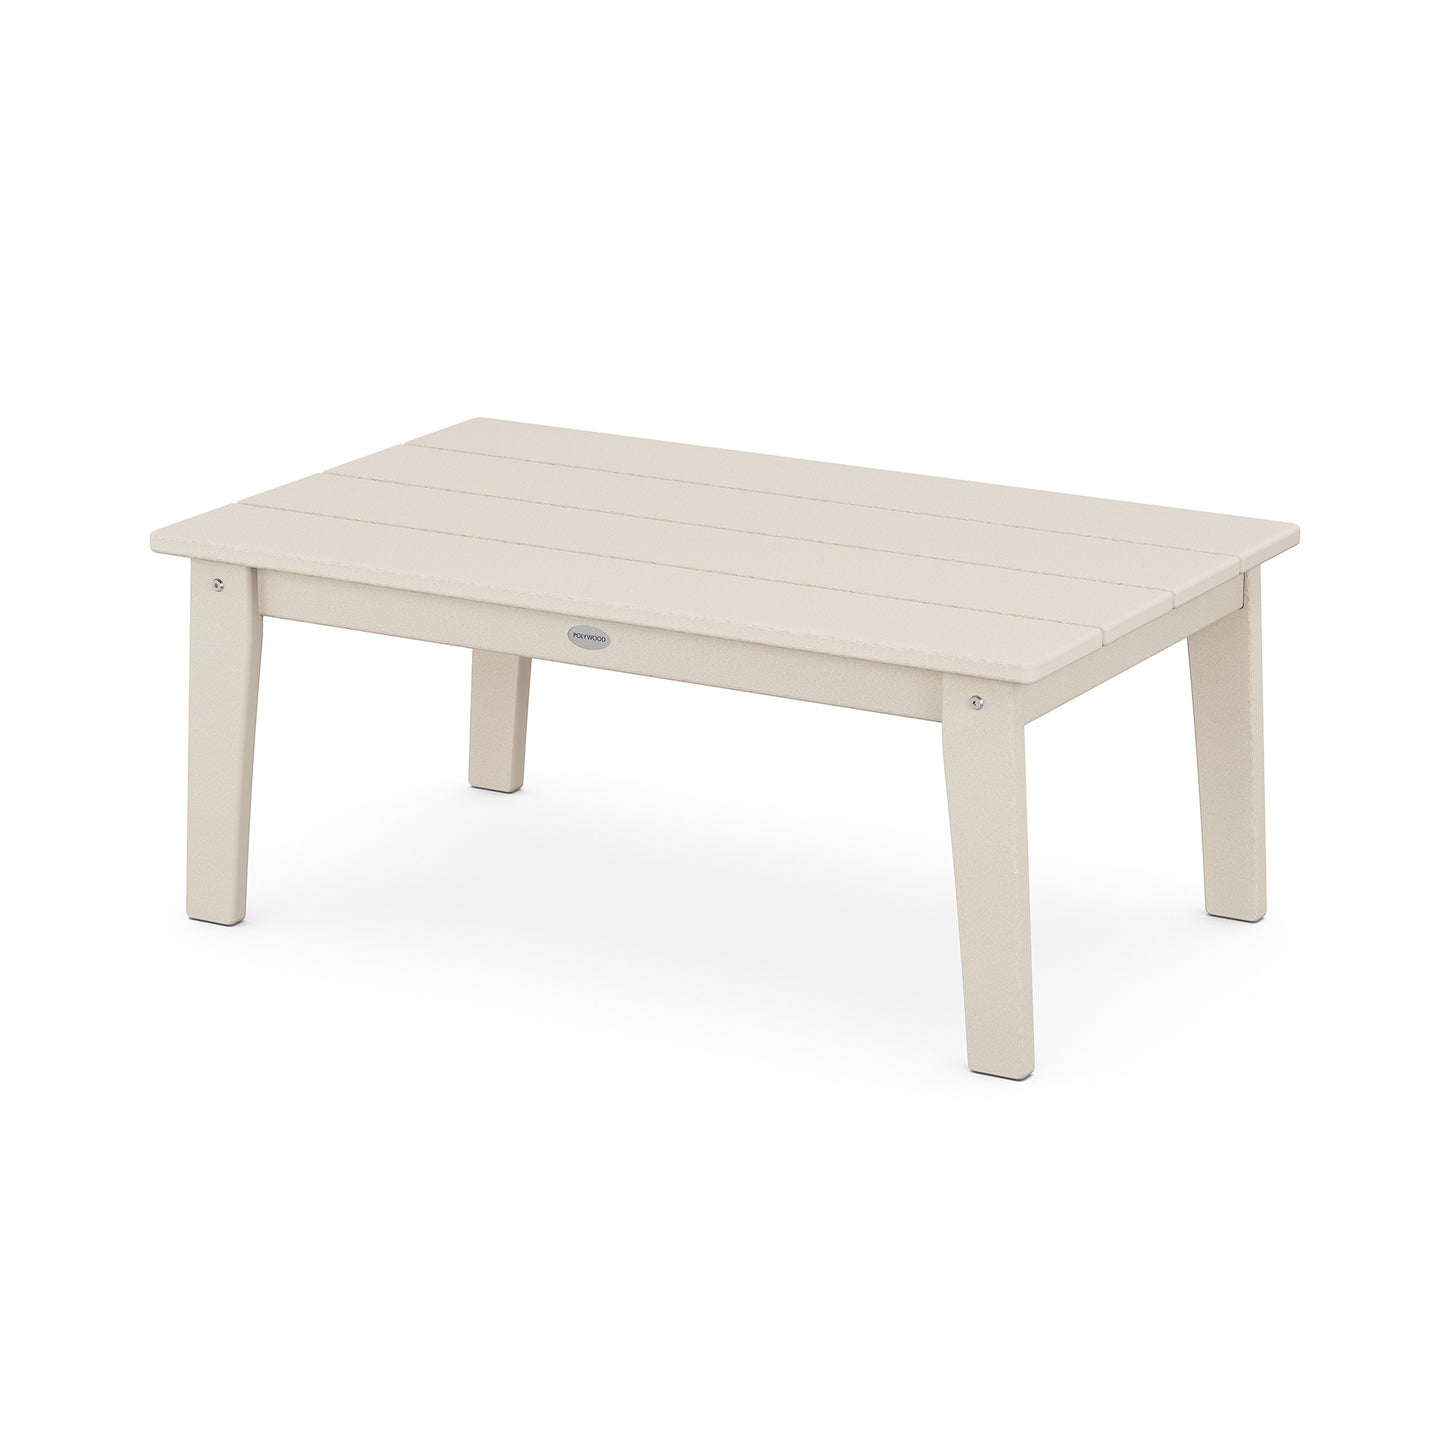 A rectangular, beige-colored POLYWOOD Lakeside 23" x 36" coffee table with a slatted top and four sturdy legs, displayed against a plain white background. A small logo is visible on one side.